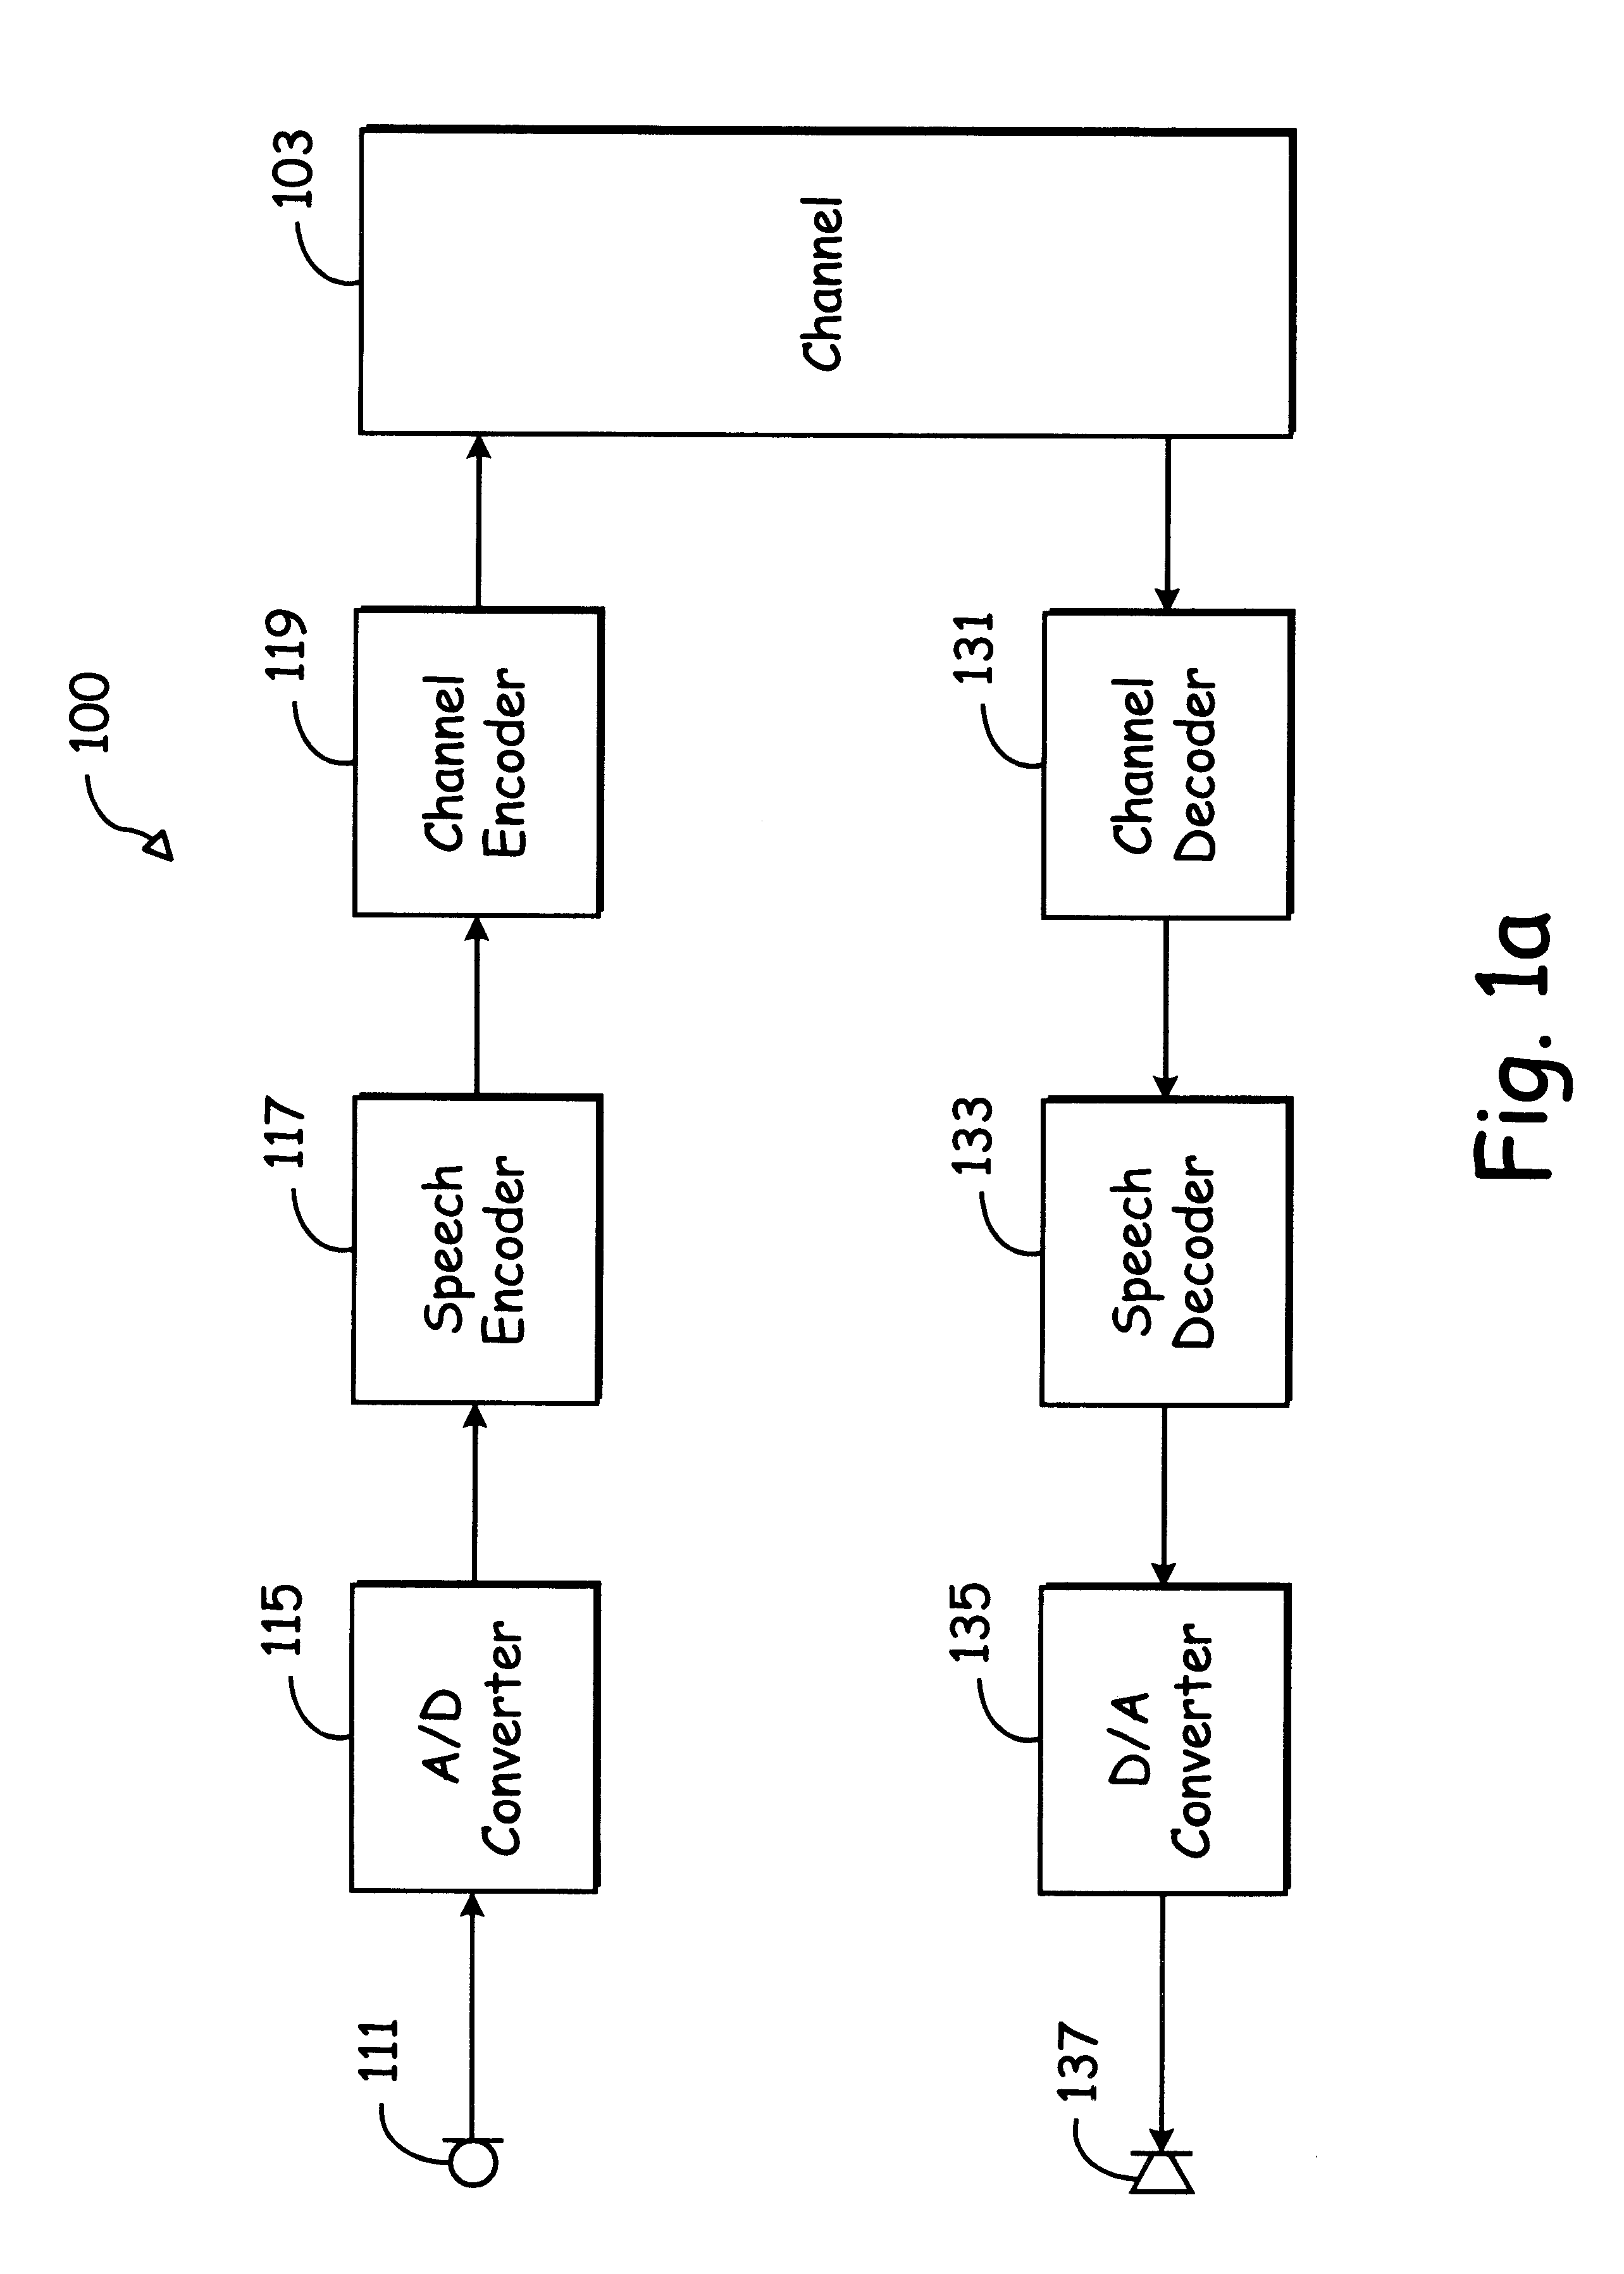 Speech encoder adaptively applying pitch preprocessing with warping of target signal